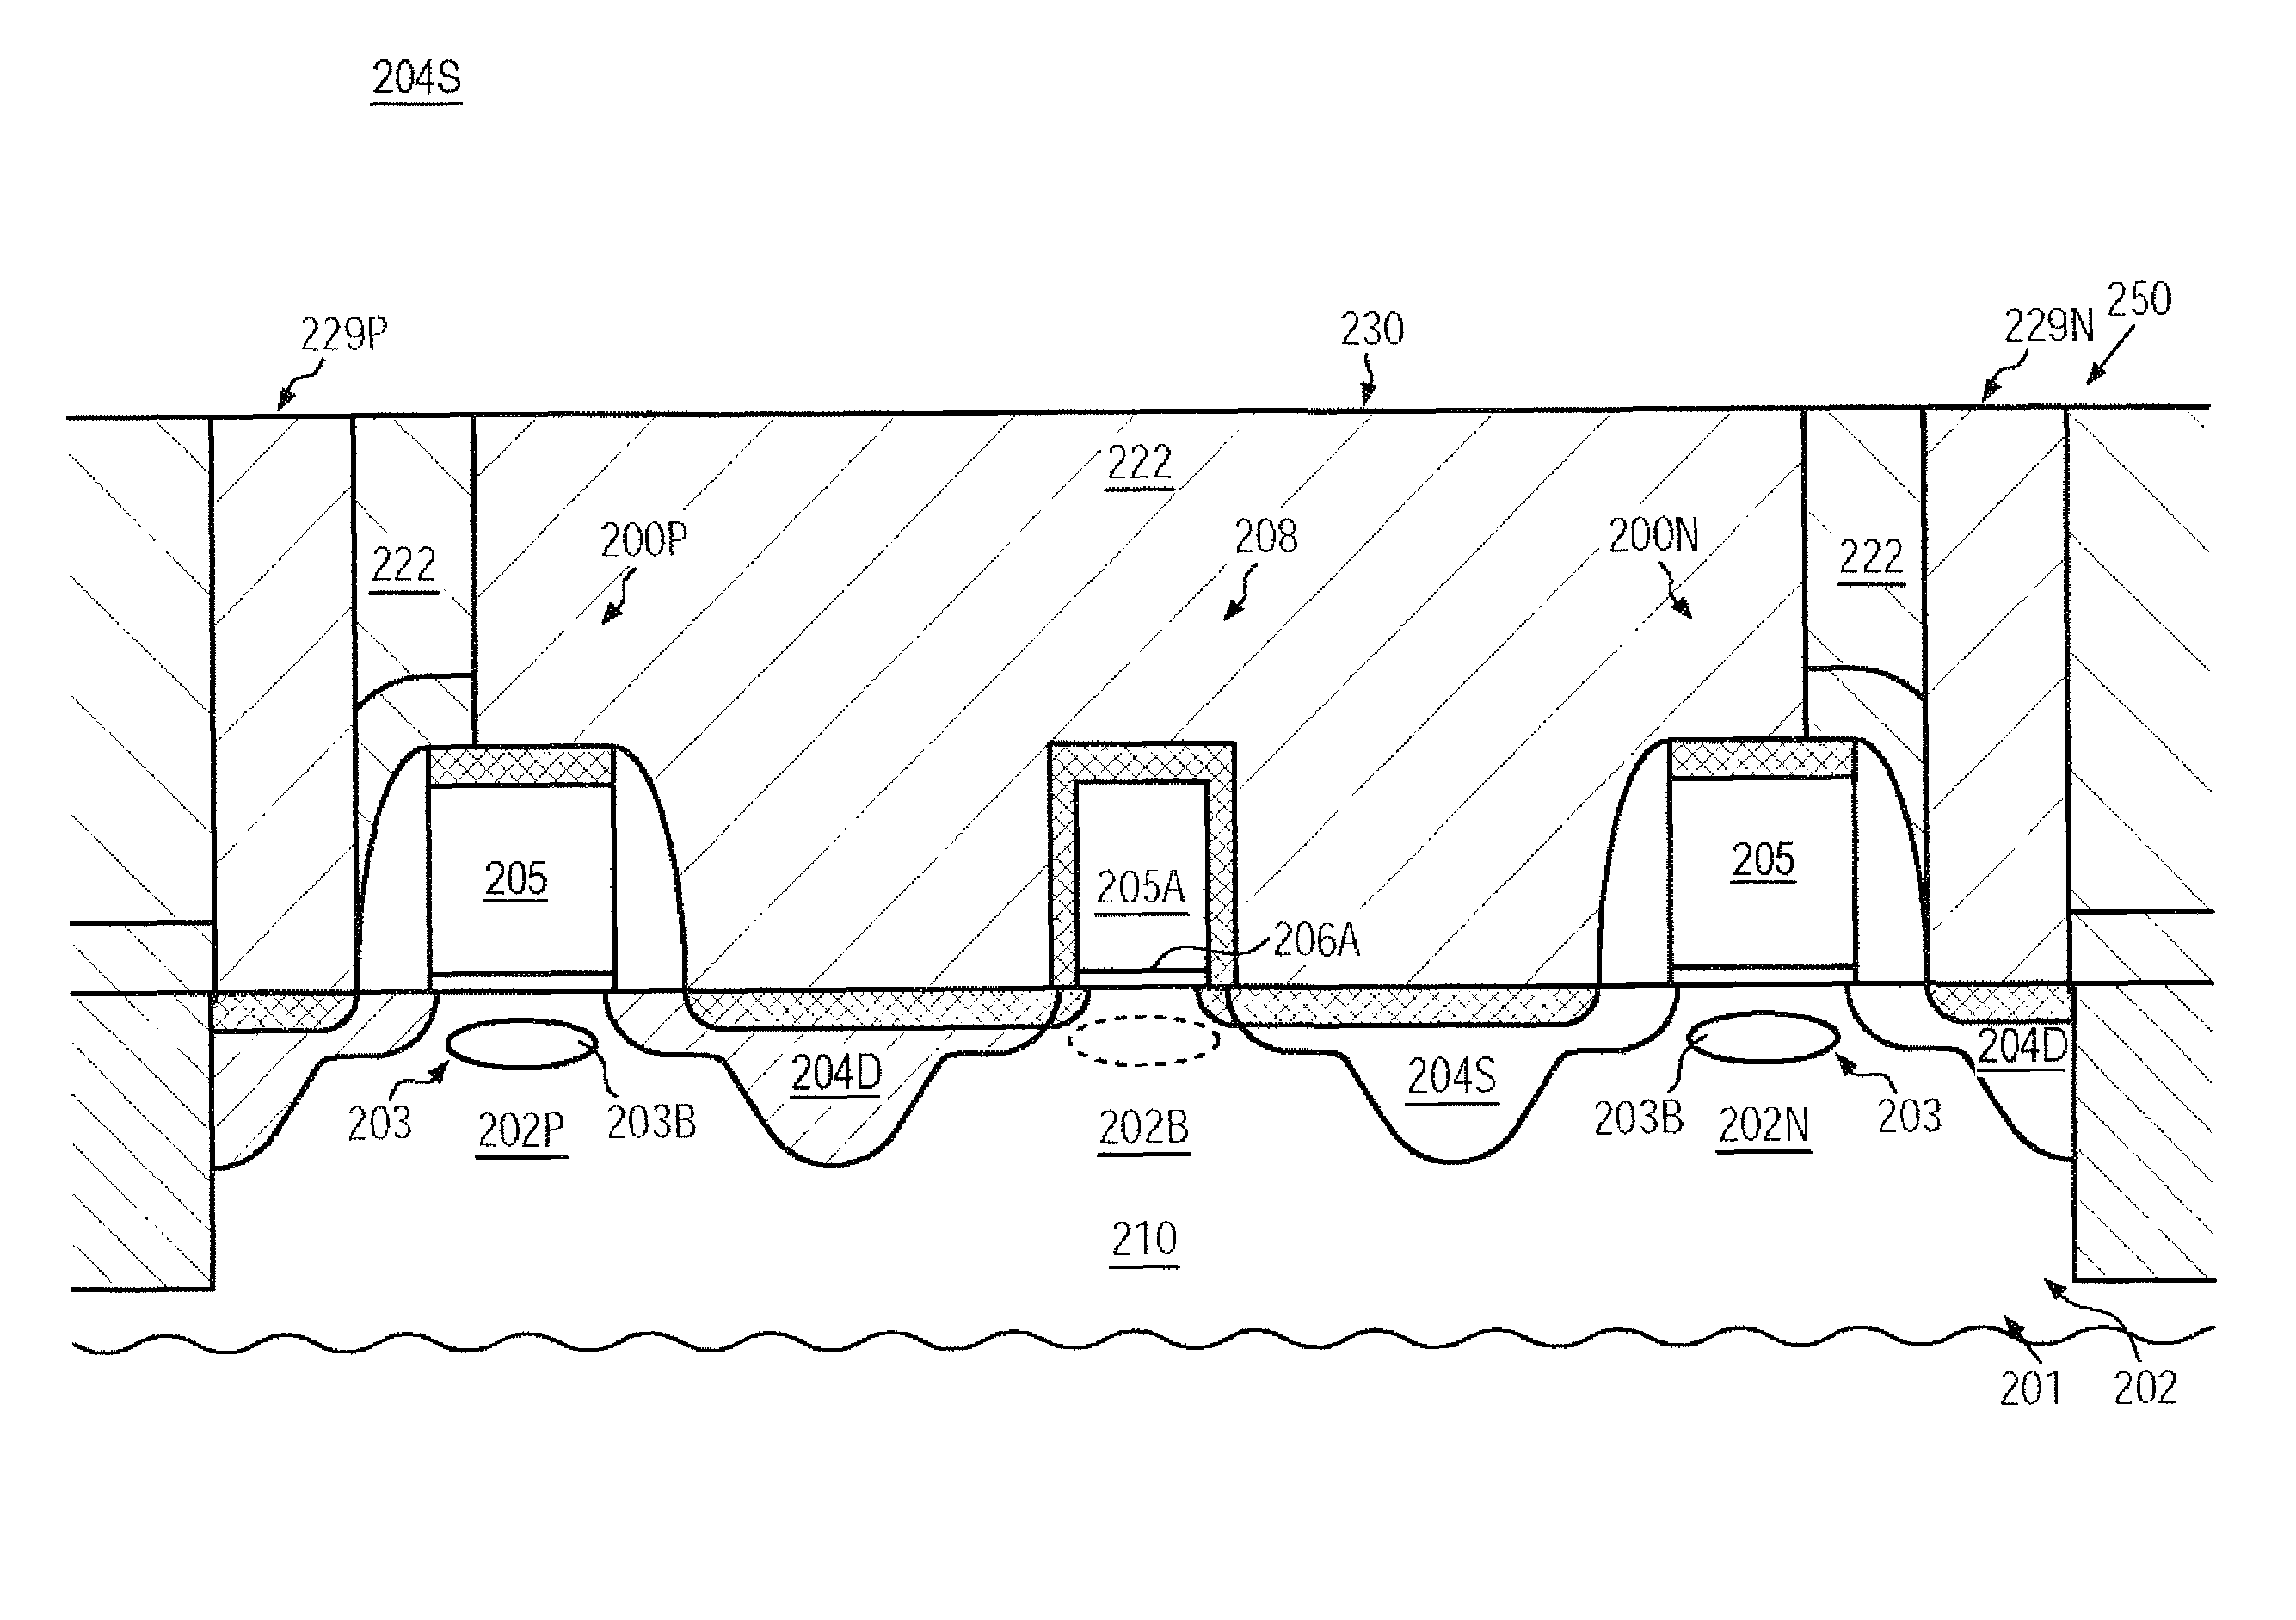 Static RAM cell design and multi-contact regime for connecting double channel transistors